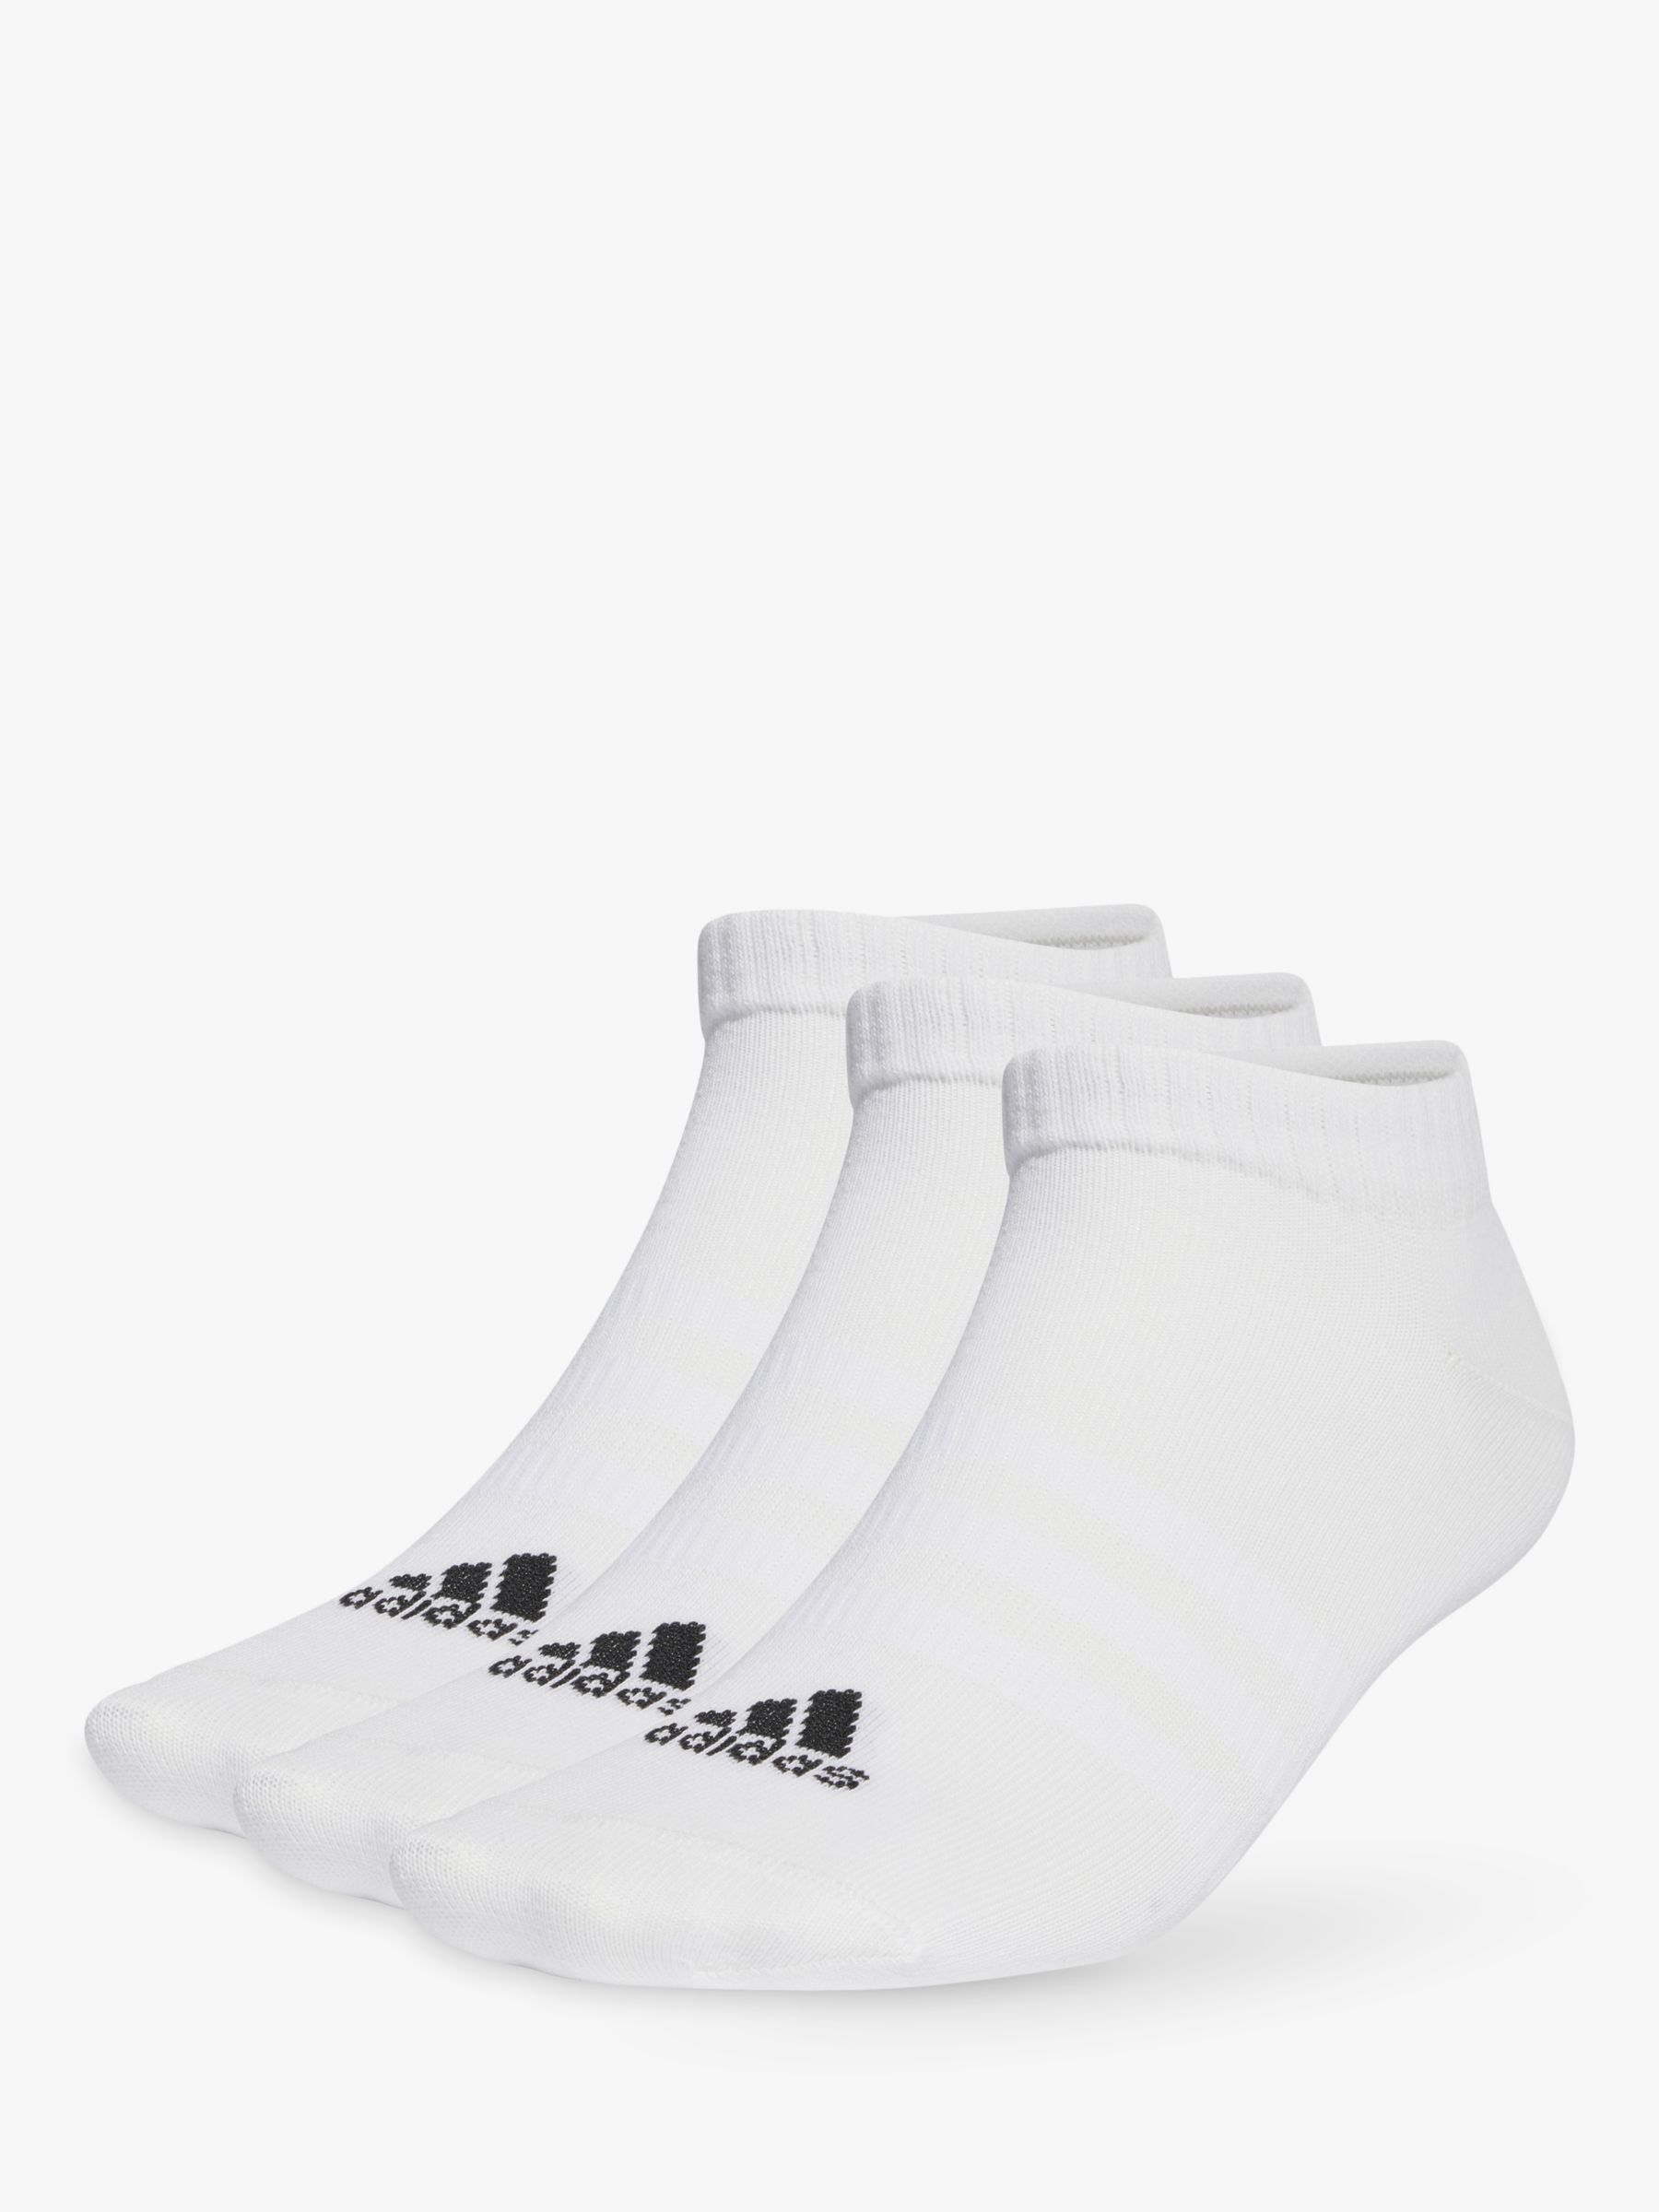 adidas Thin and Light Low-Cut Socks, Pack of 3, White/Black, 4.5-5.5